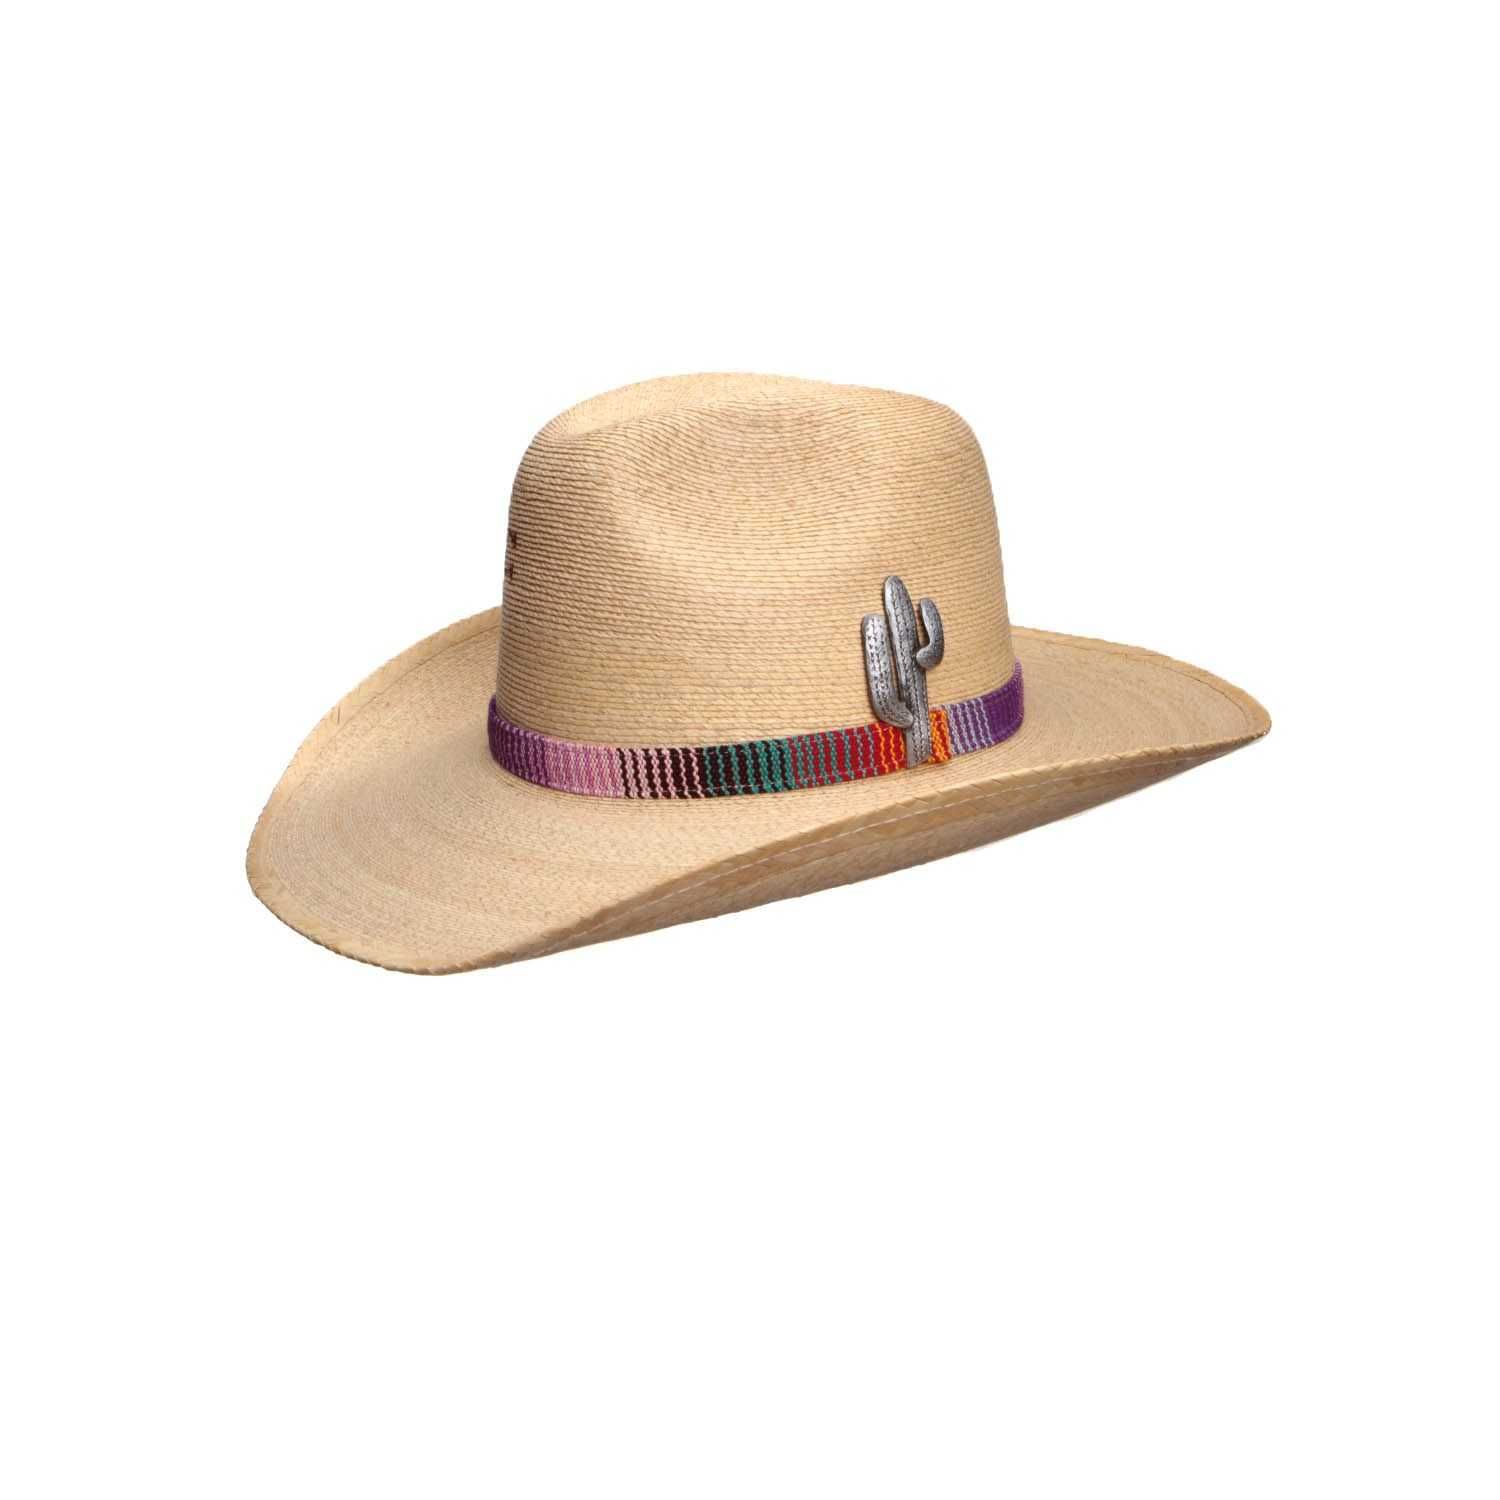 Hats Cowboy Cowgirl Rodeo Western Straw Hats ACowBg35-1 